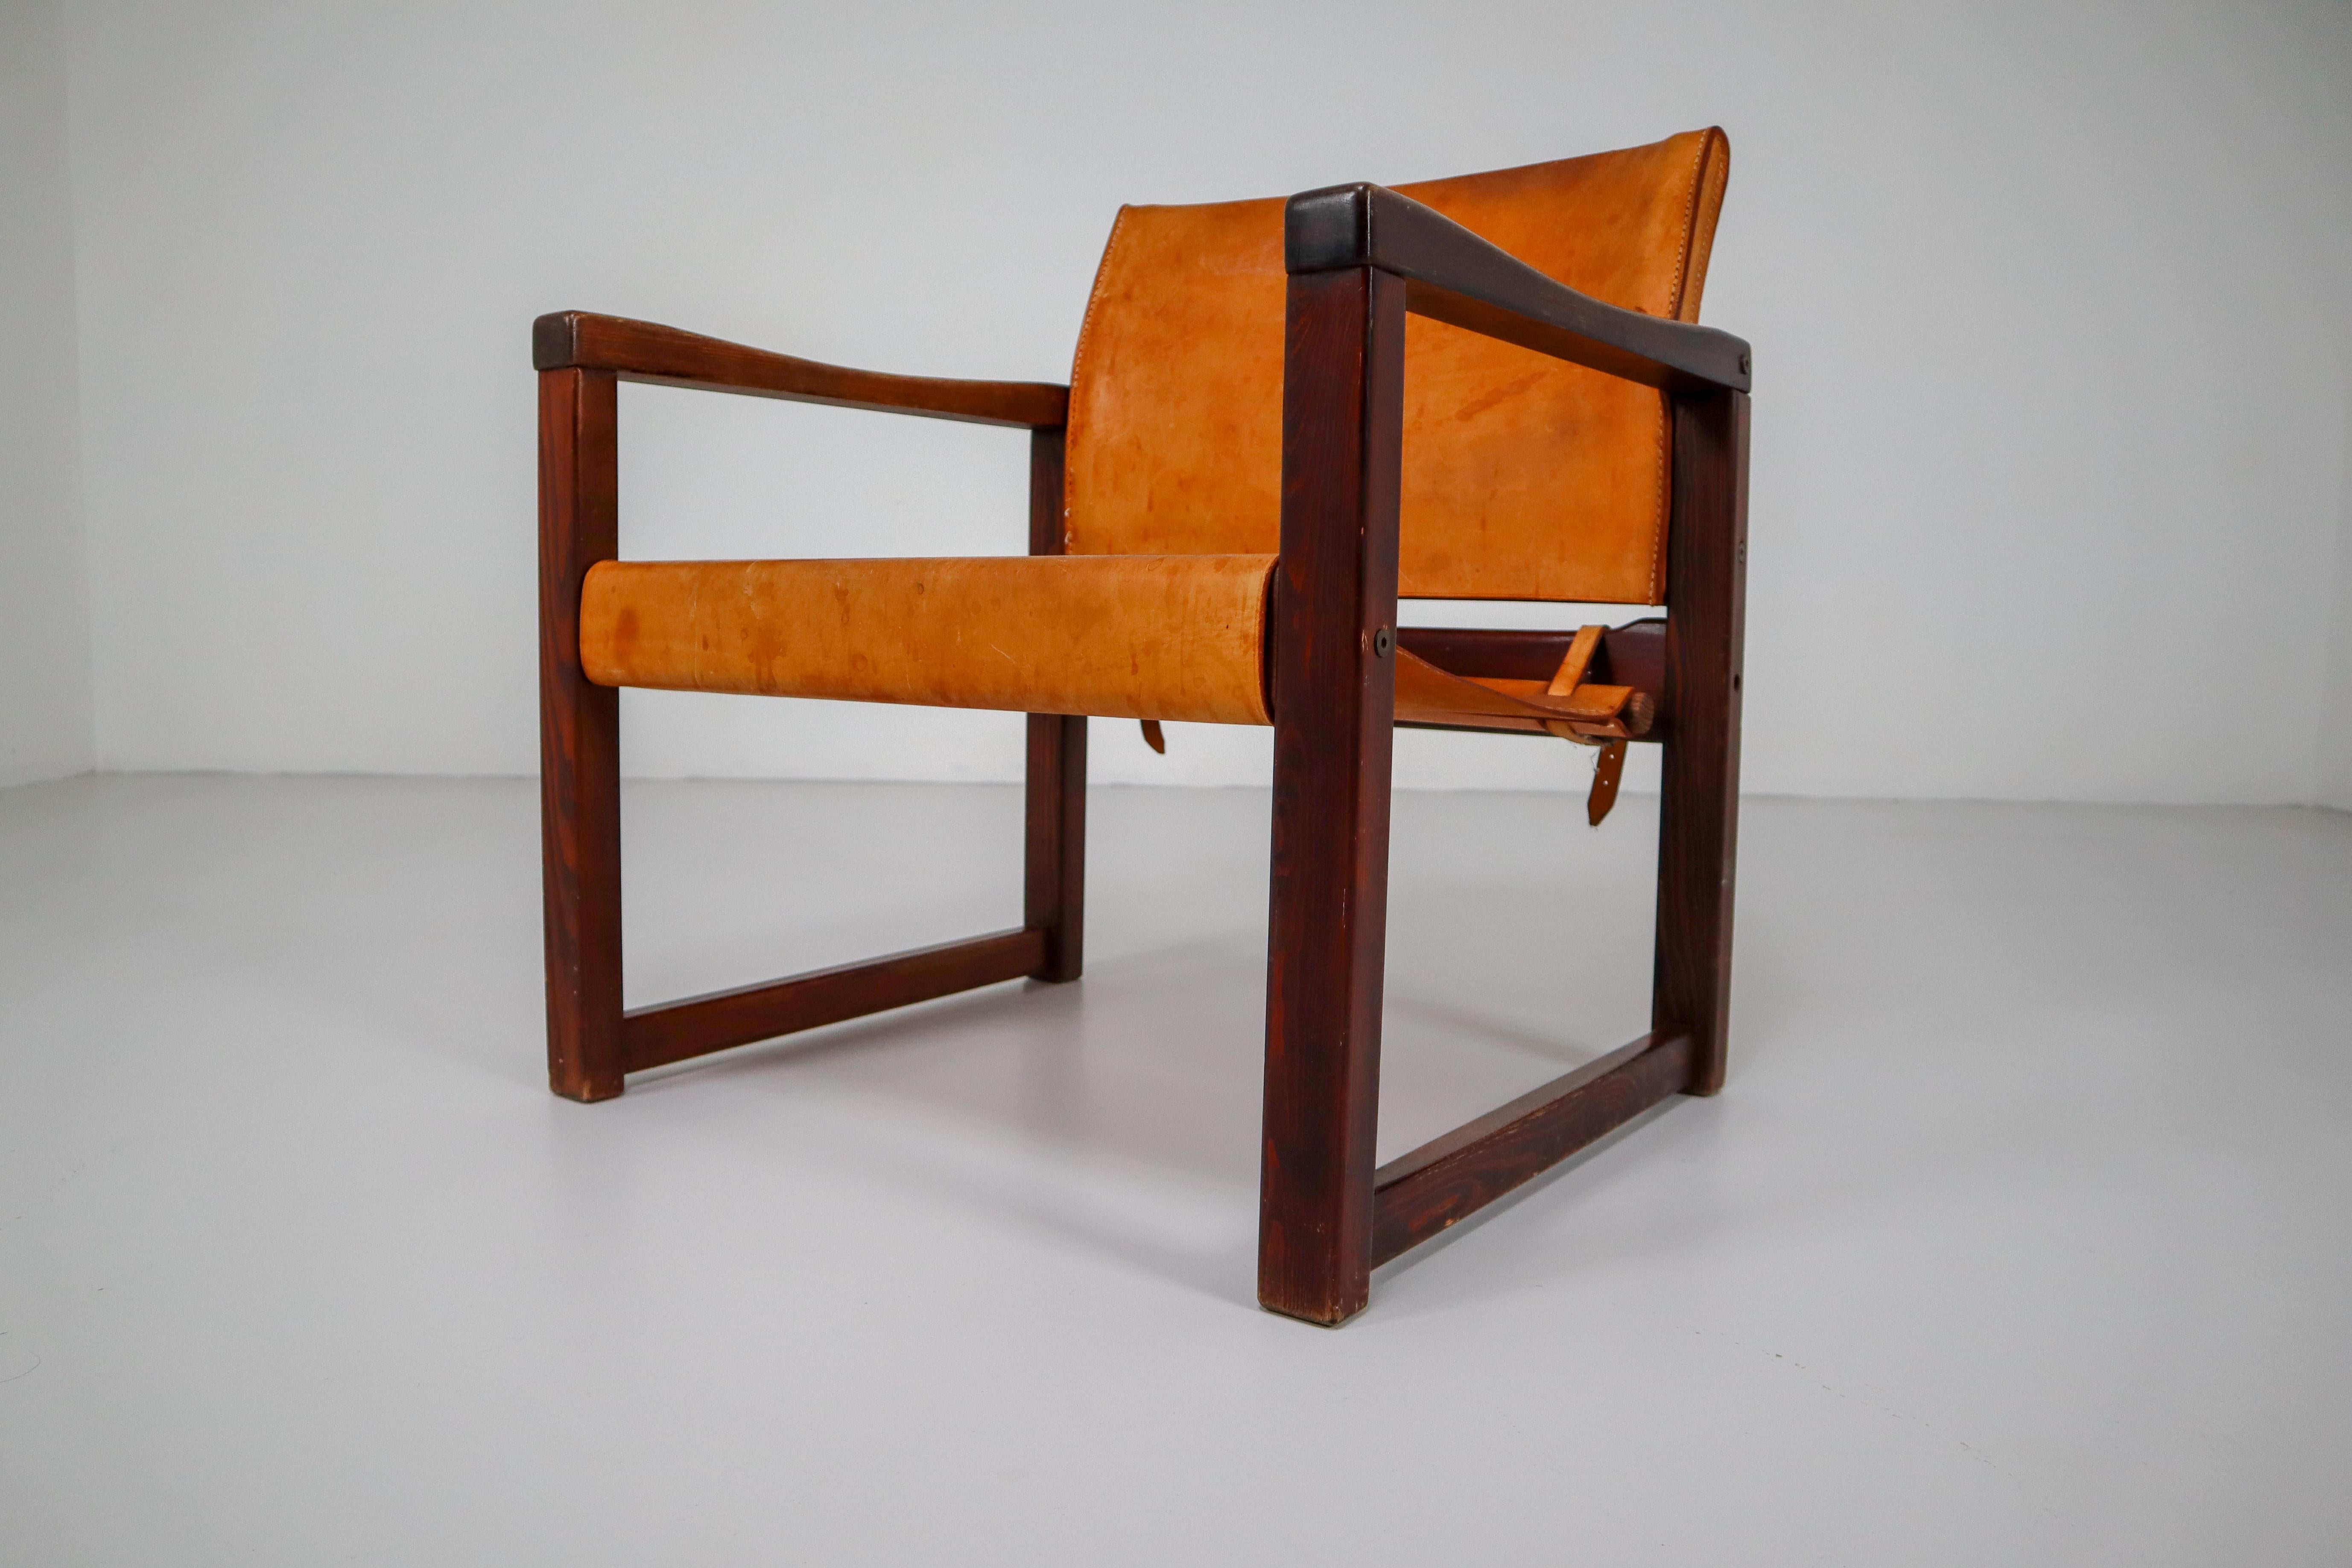 Set of ten safari lounge chairs in absolutely gorgeous patinated cognac saddle leather and solid pinewood, circa 1970s. The thick saddle leather is beautifully patinated during use and age and shows interesting stitching. There is a color difference